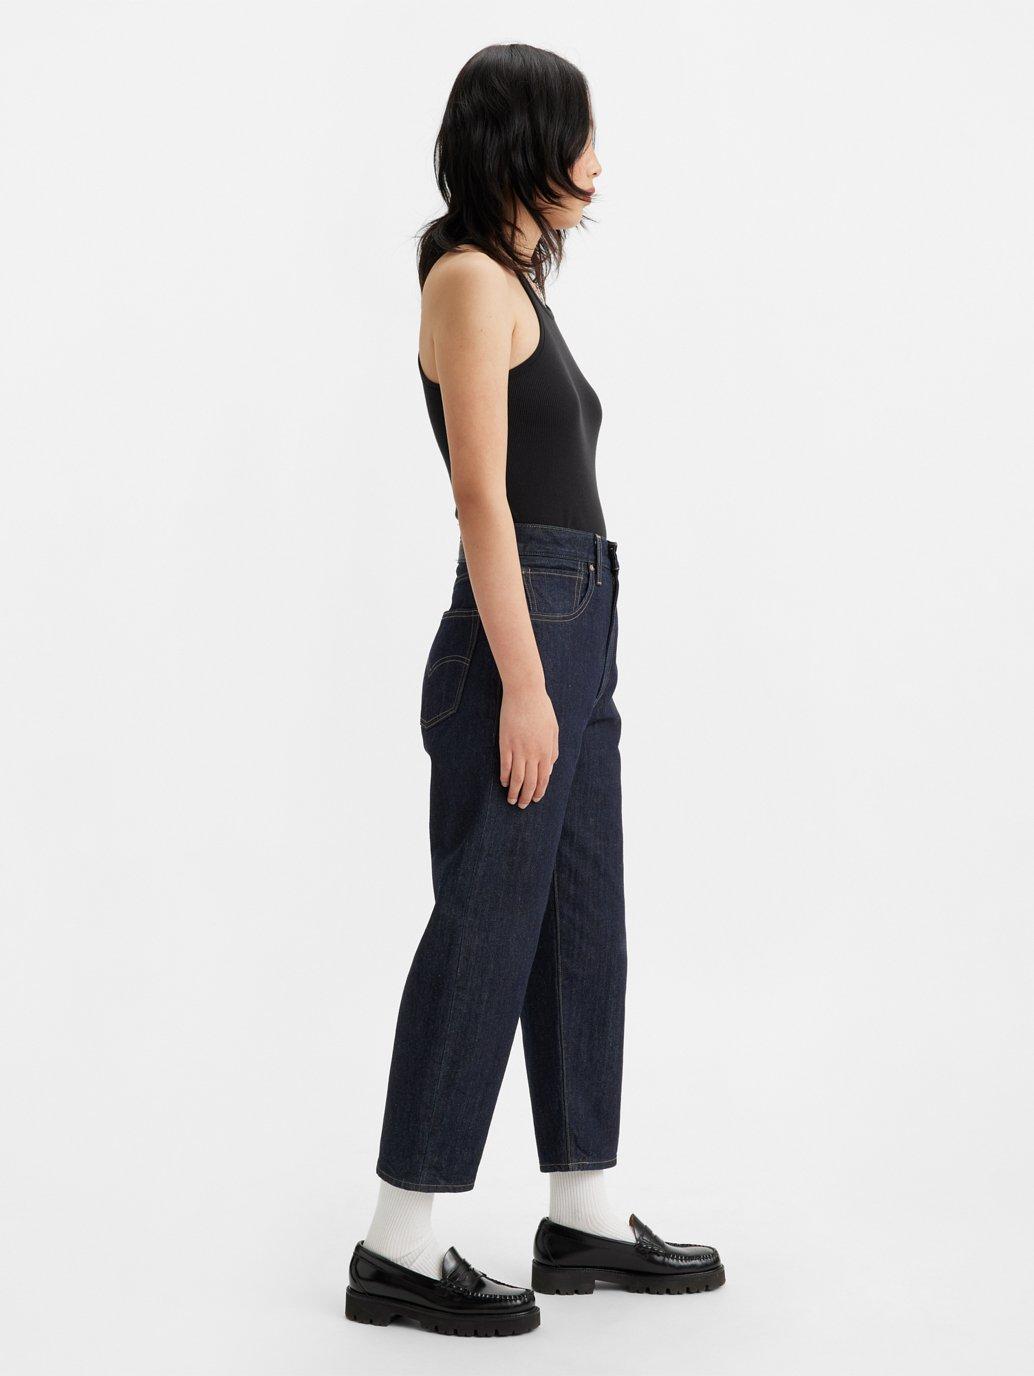 Buy Levi's® Women's Made in Japan Barrel Jeans | Levi’s® Official ...